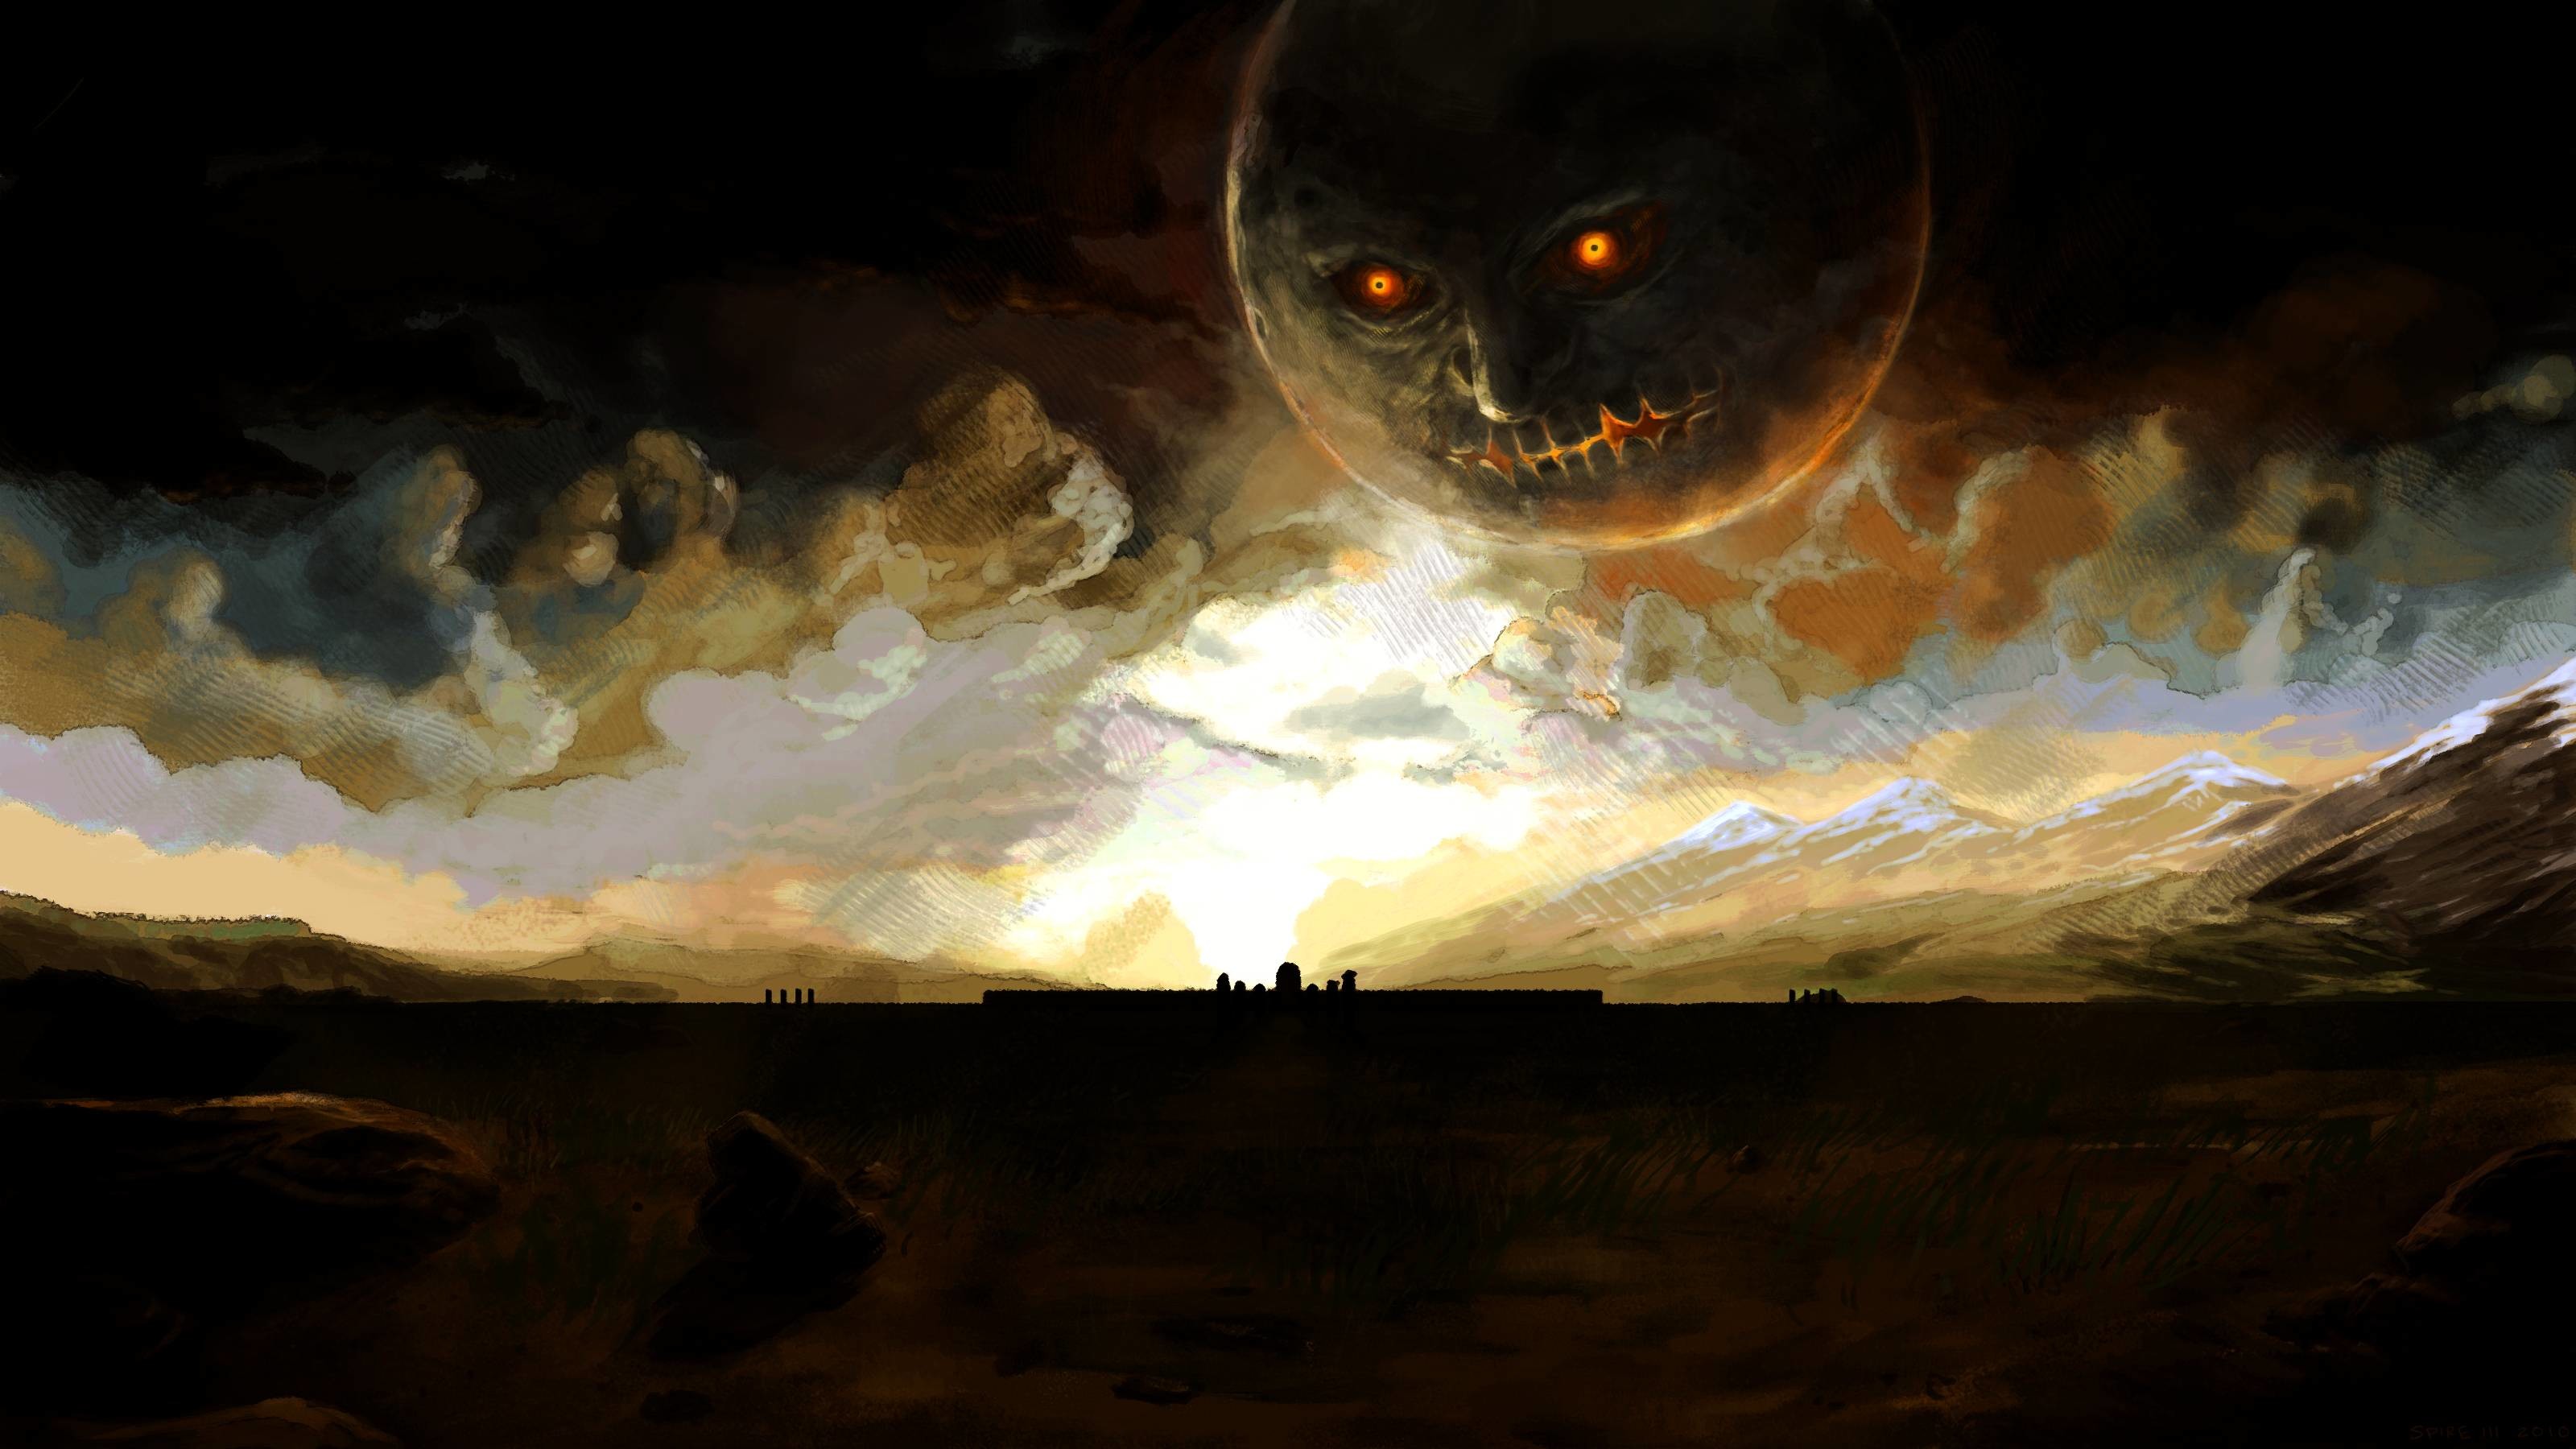 3200x1800 An awesome Majora's Mask wallpaper I found.